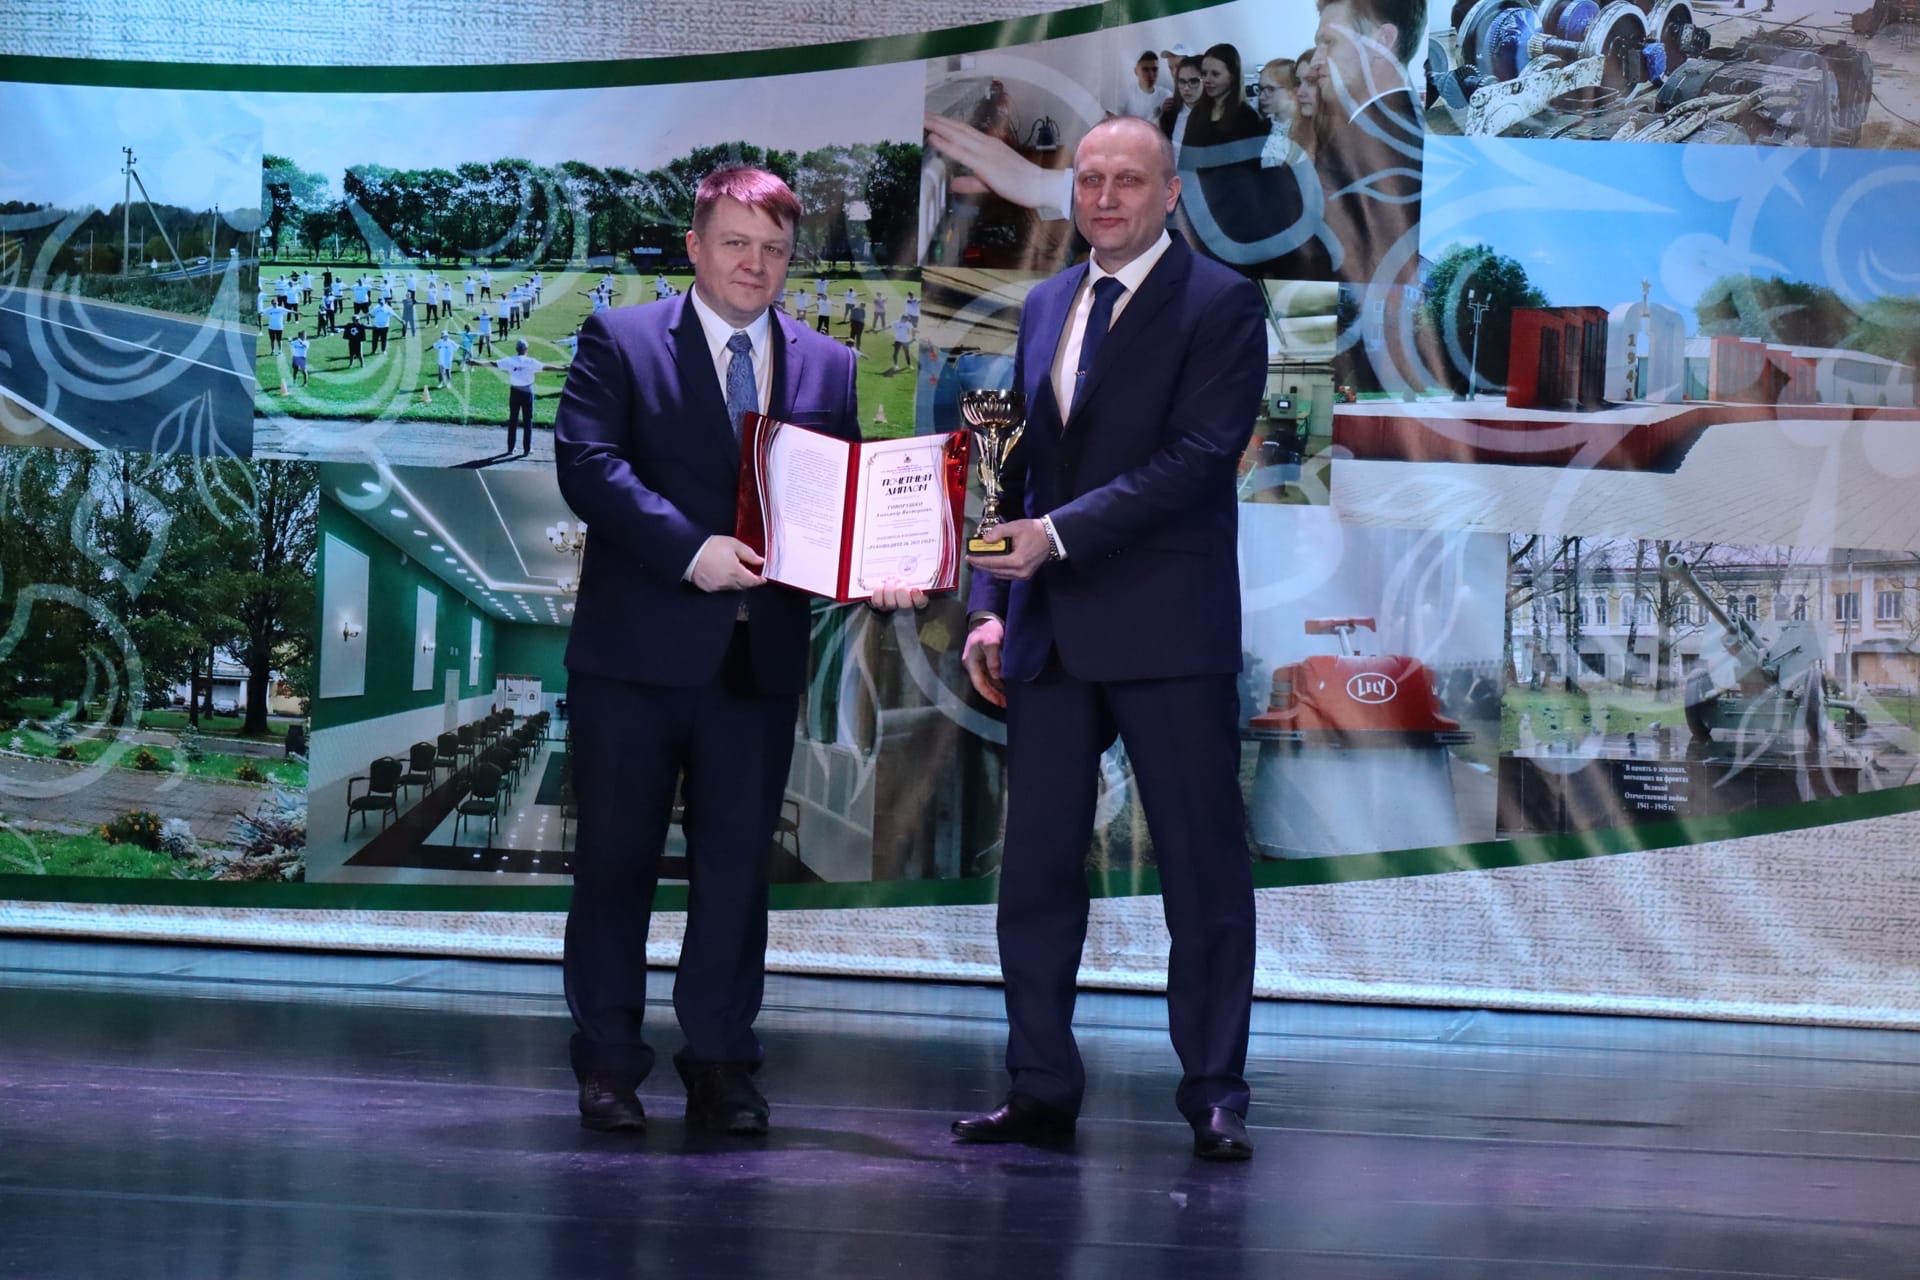 “VokhtogaLesDrev became the best company in Gryazovets municipal district